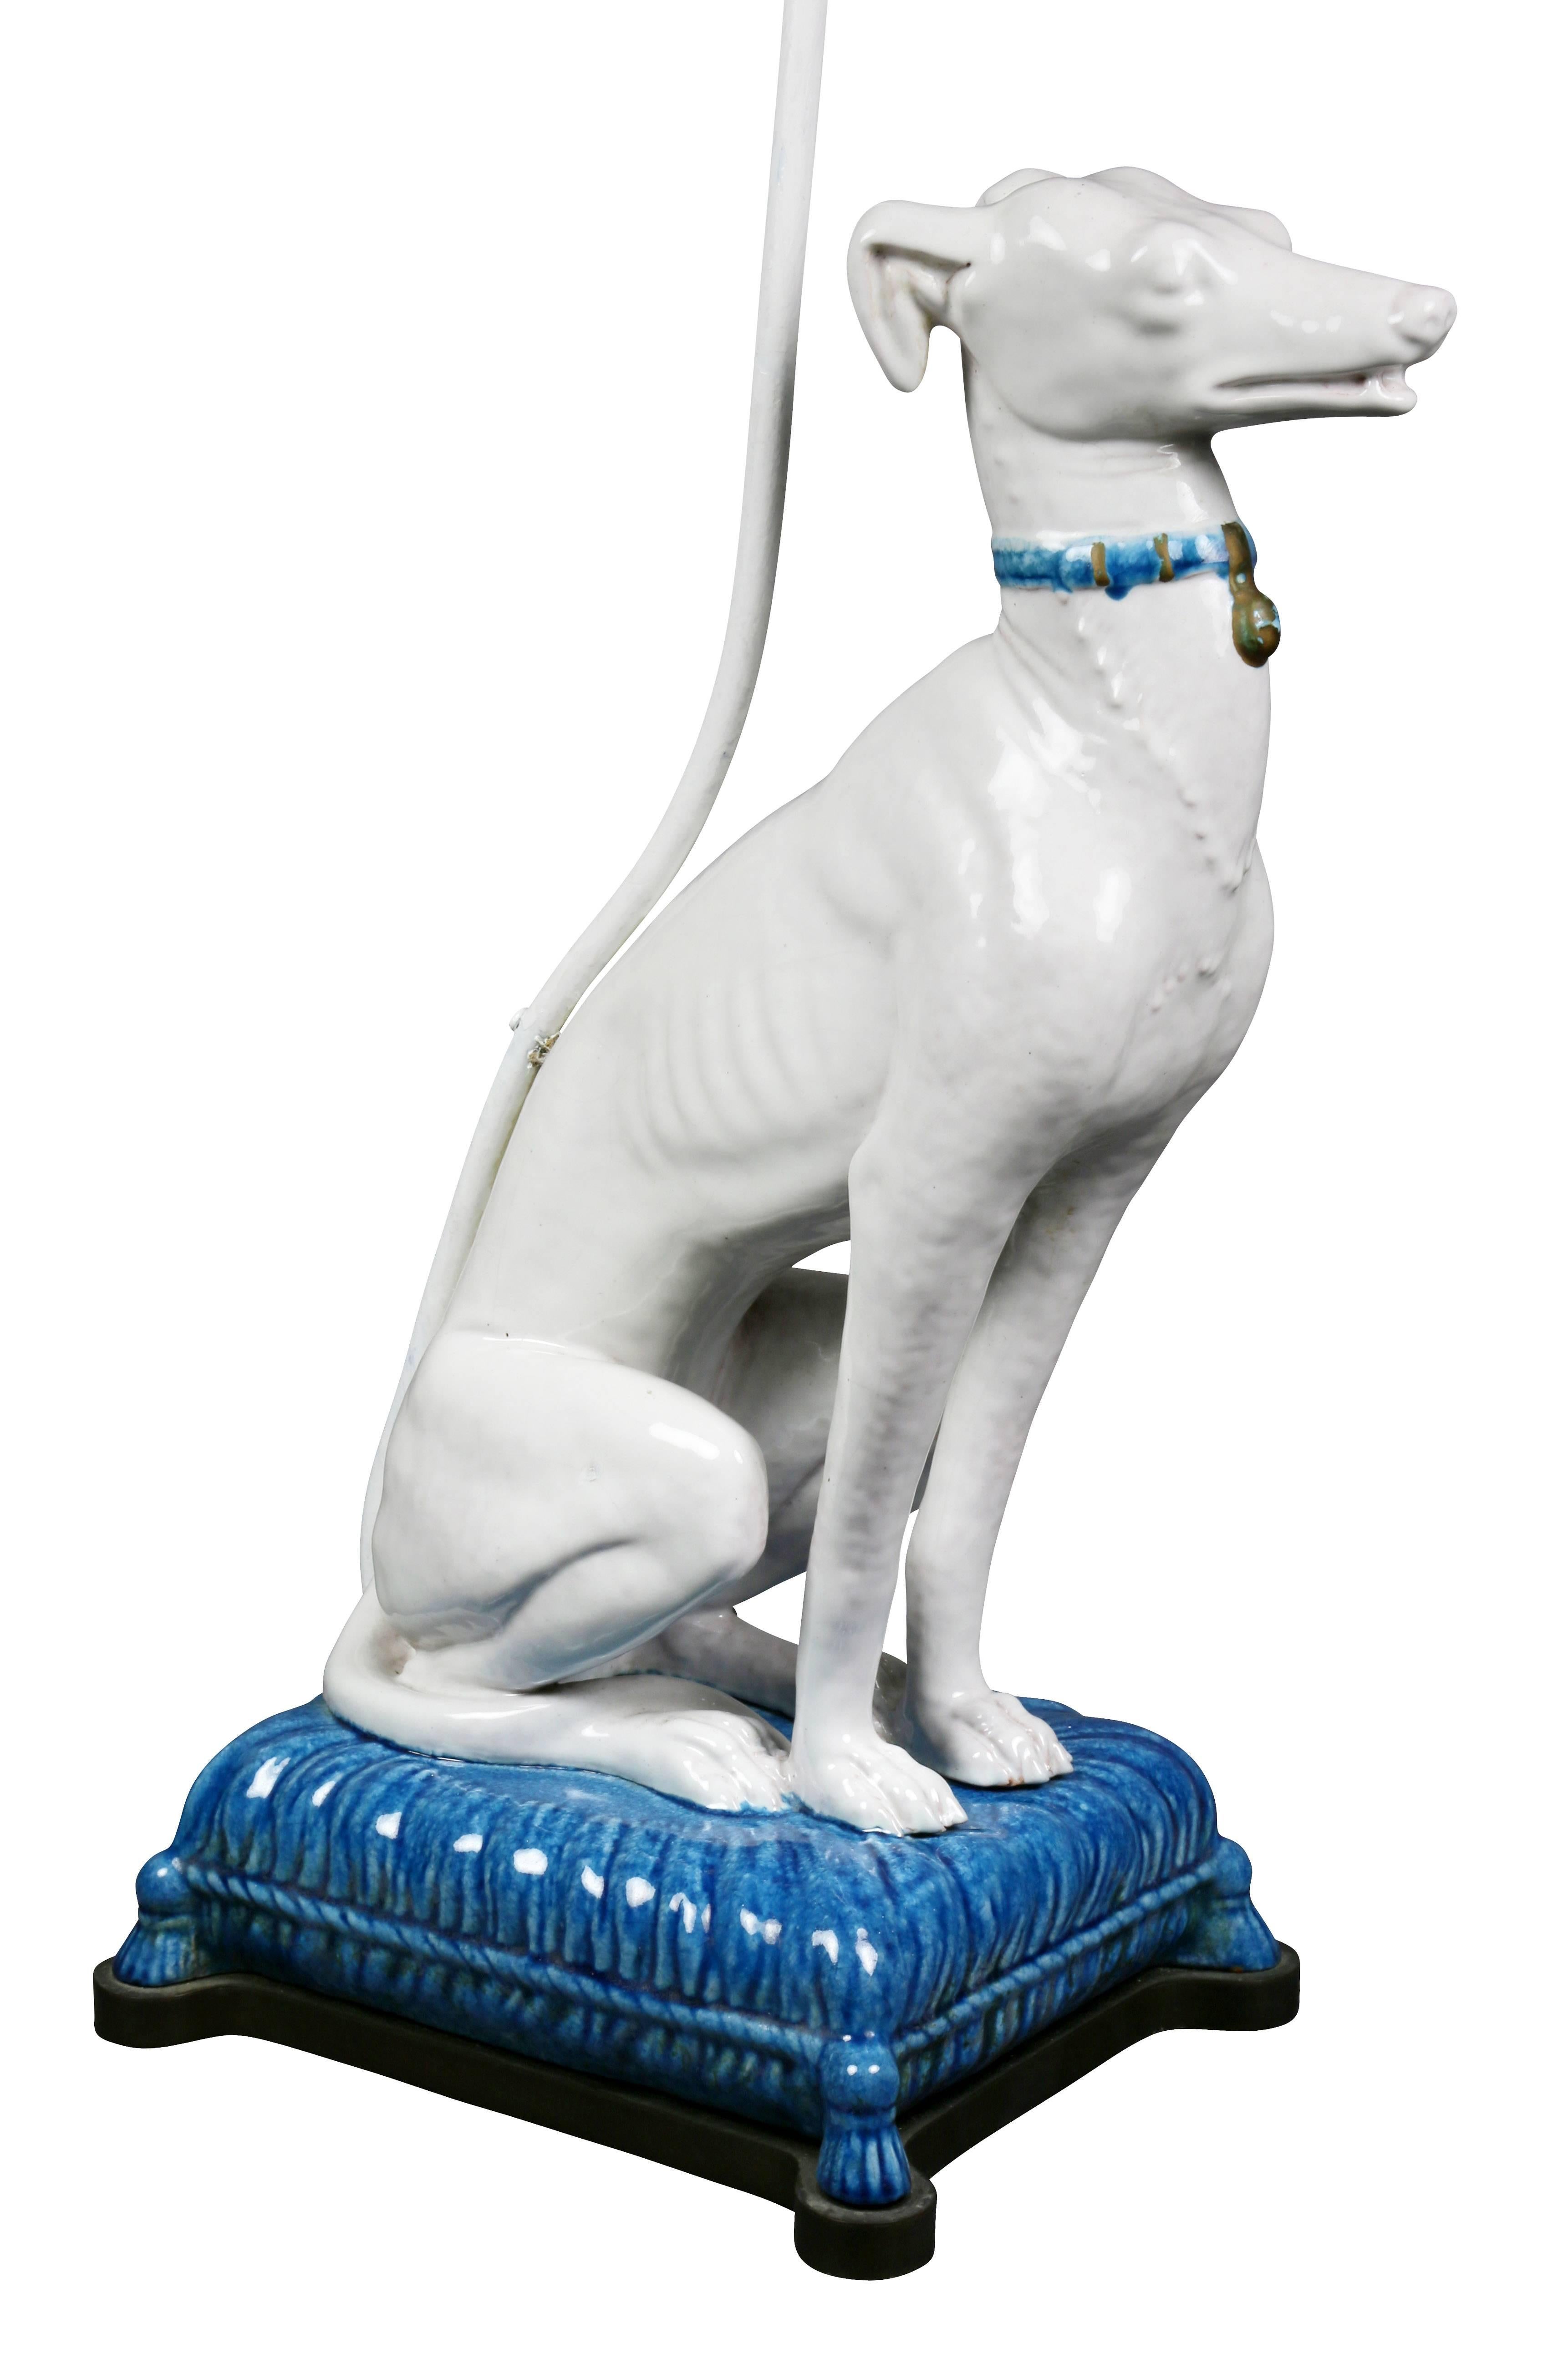 English Pair of Pottery Figures of Seated Whippets Mounted as Lamps